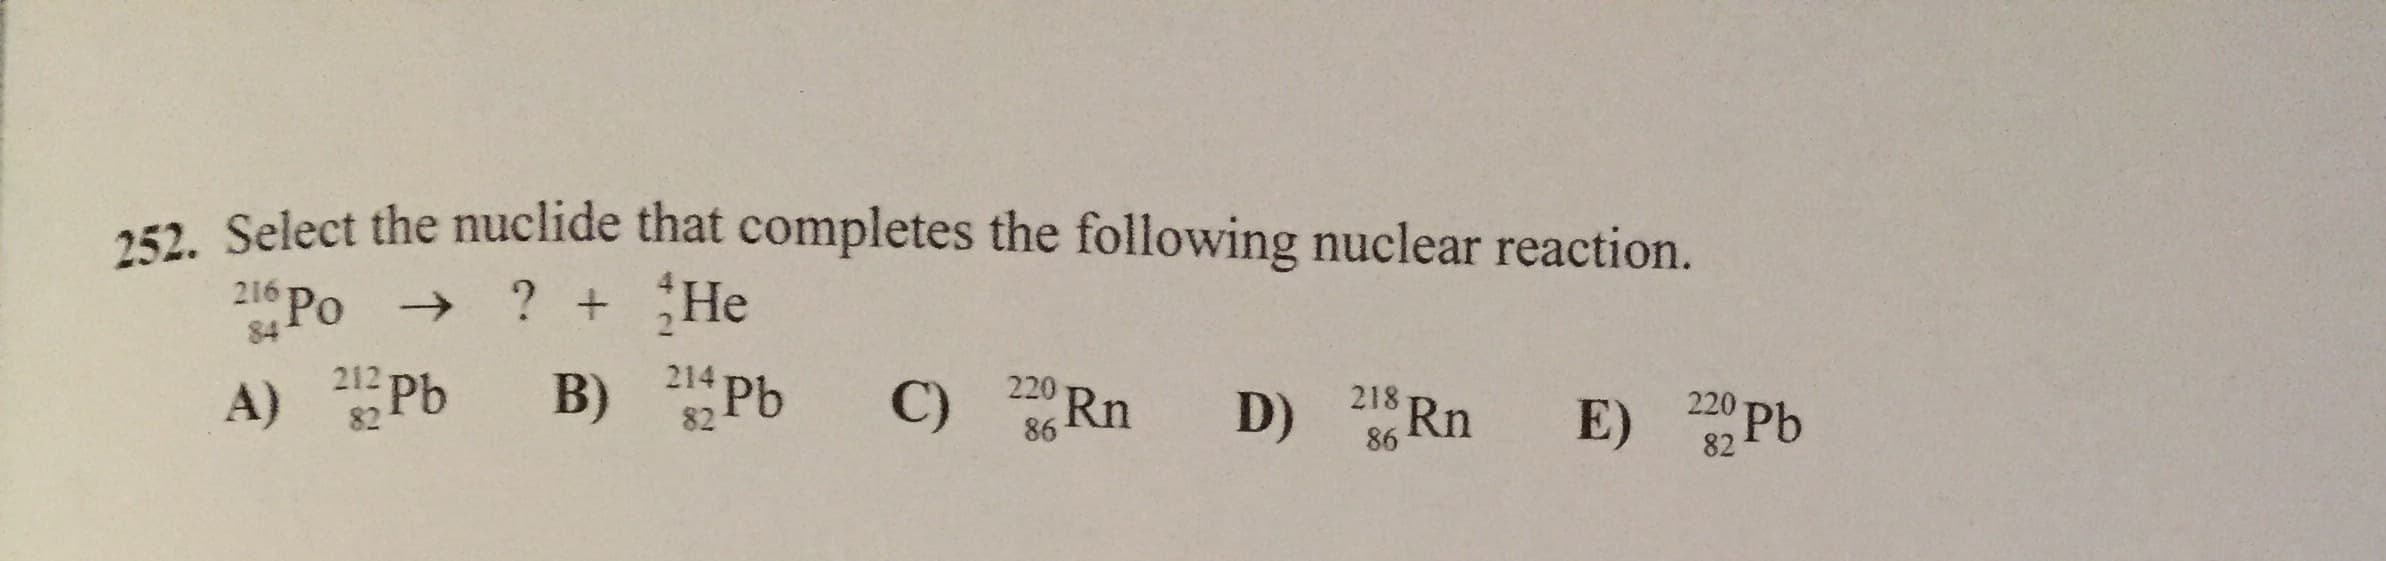 252. Select the nuclide that completes the following nuclear reaction.
? +He
216 Po >
84
B) РЬ
214
212 T
82
C) Rn
A) Pb
220
220 Pb
218
82 Pb
86
86
82
